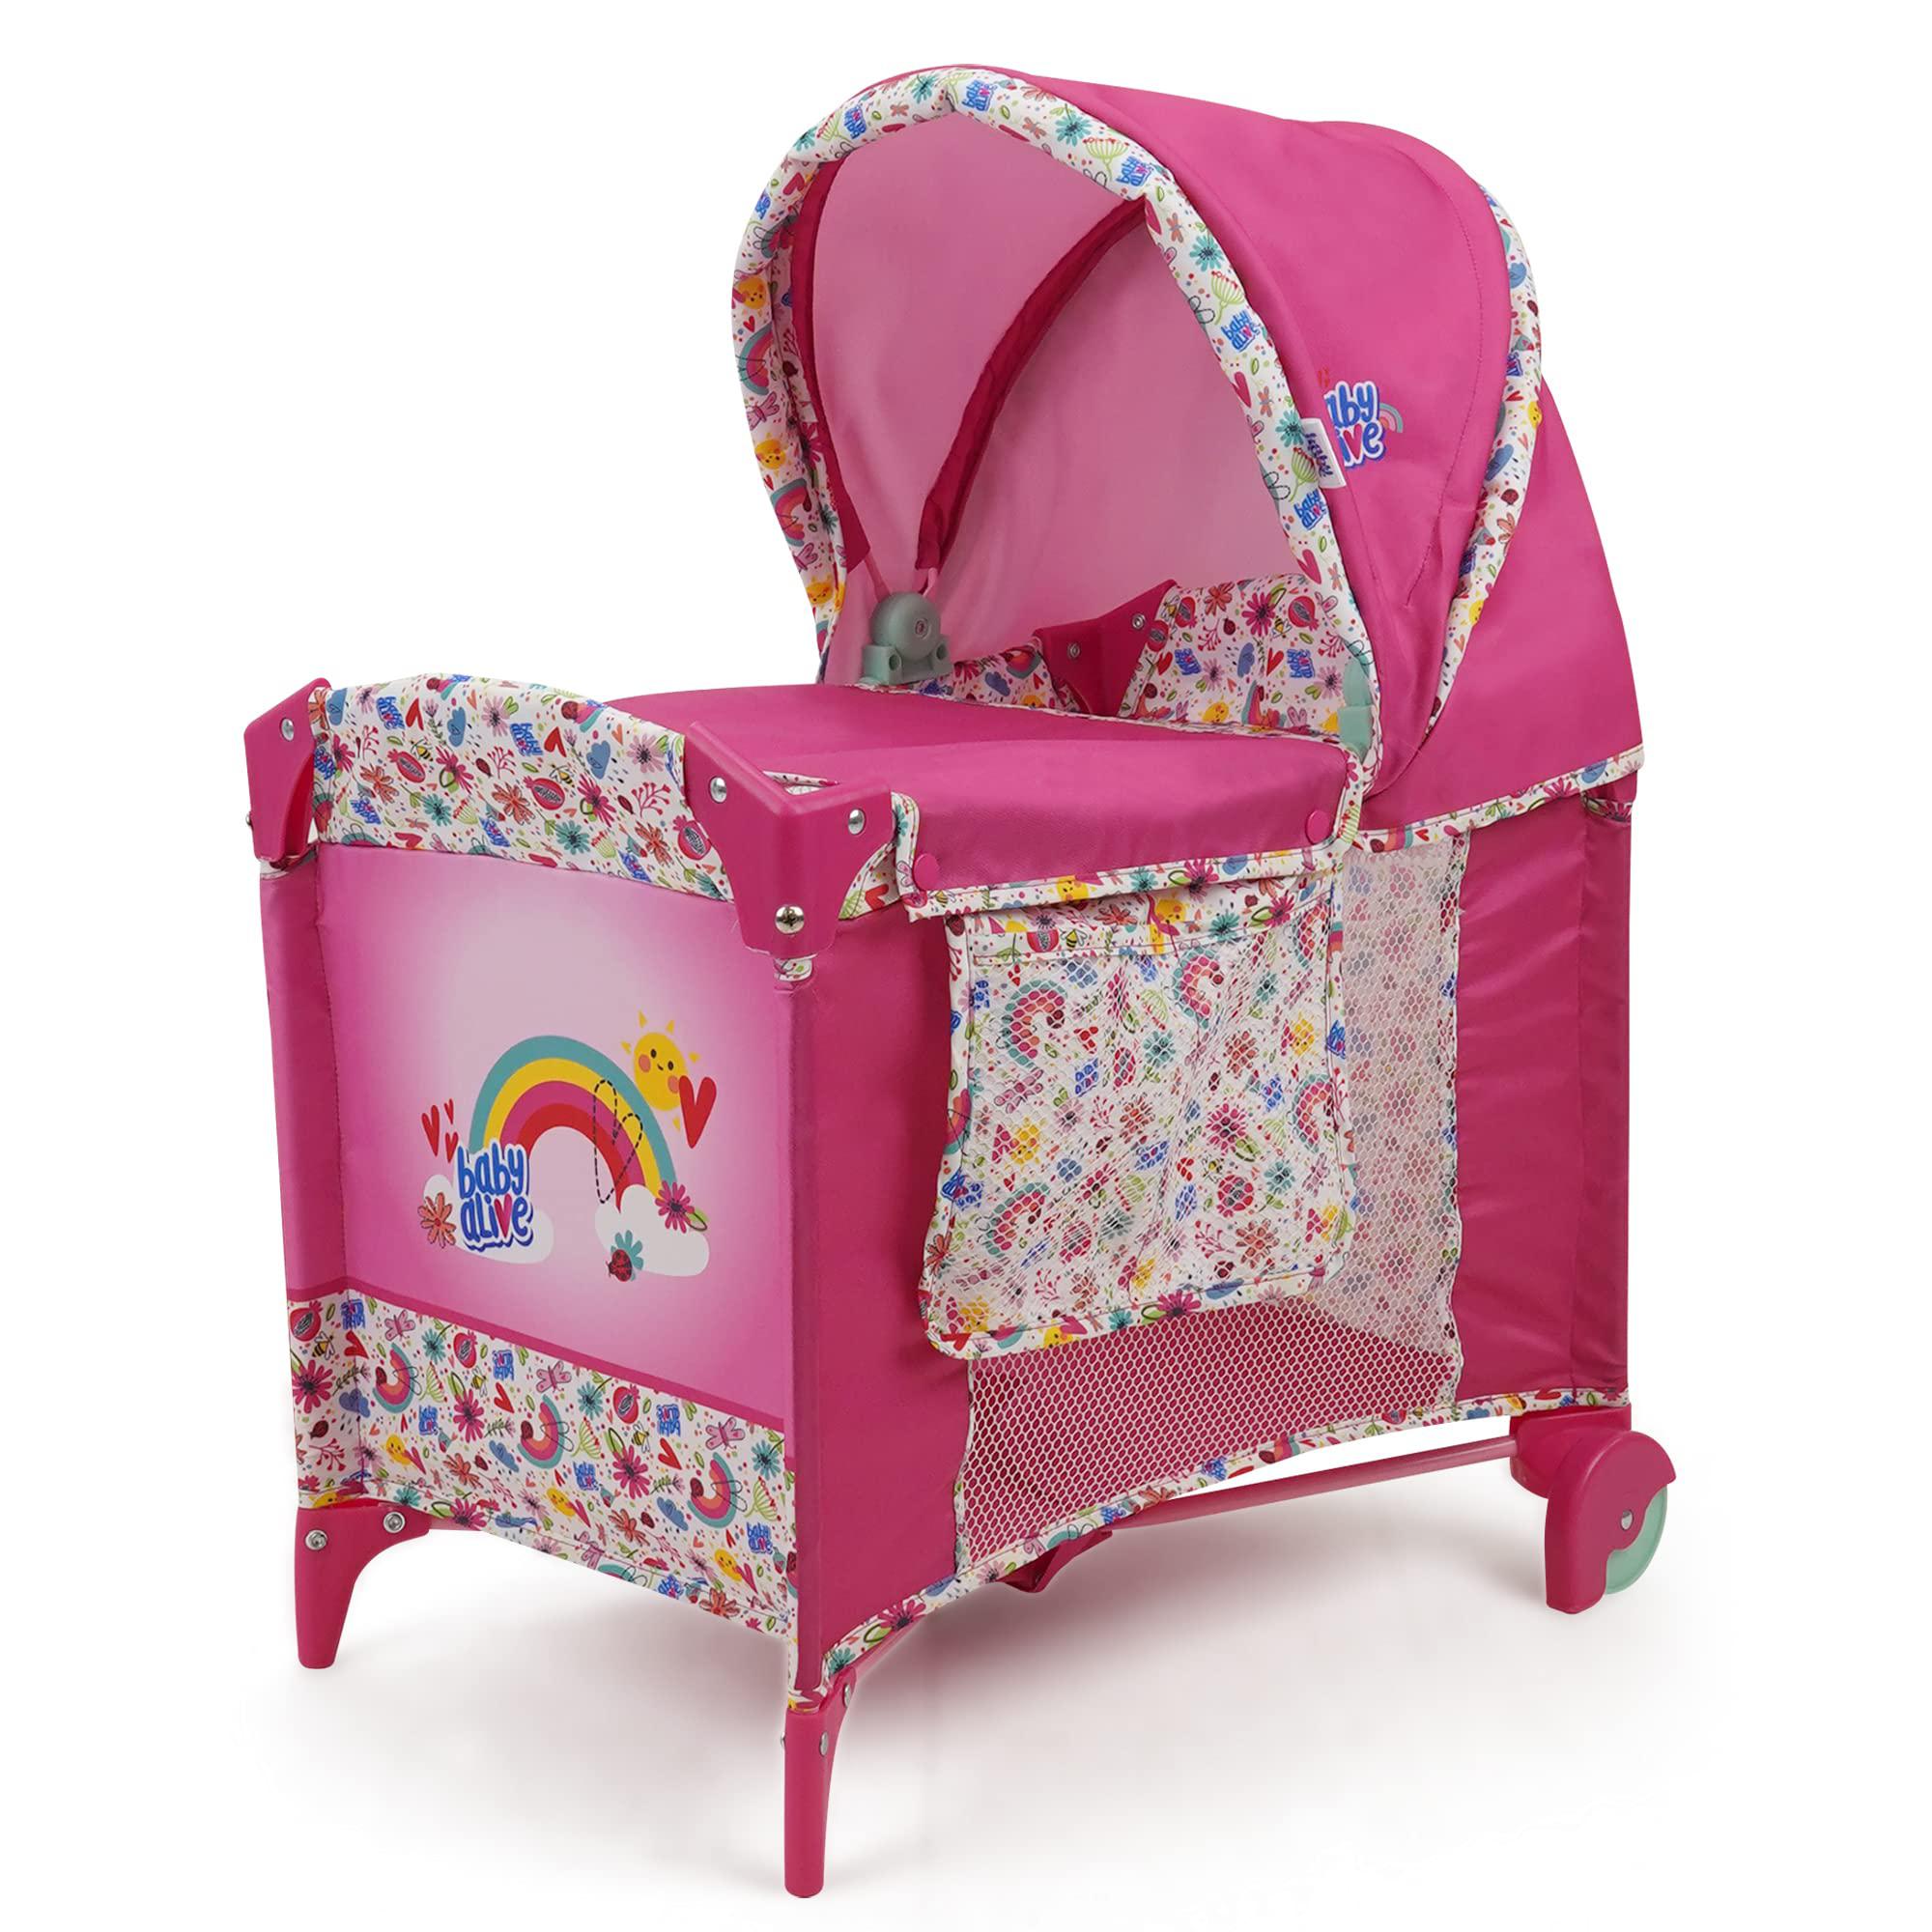 baby alive: deluxe doll play yard - pink & rainbow - fits dolls up to 18", retractable canopy, easy maneuvering, folds for tr